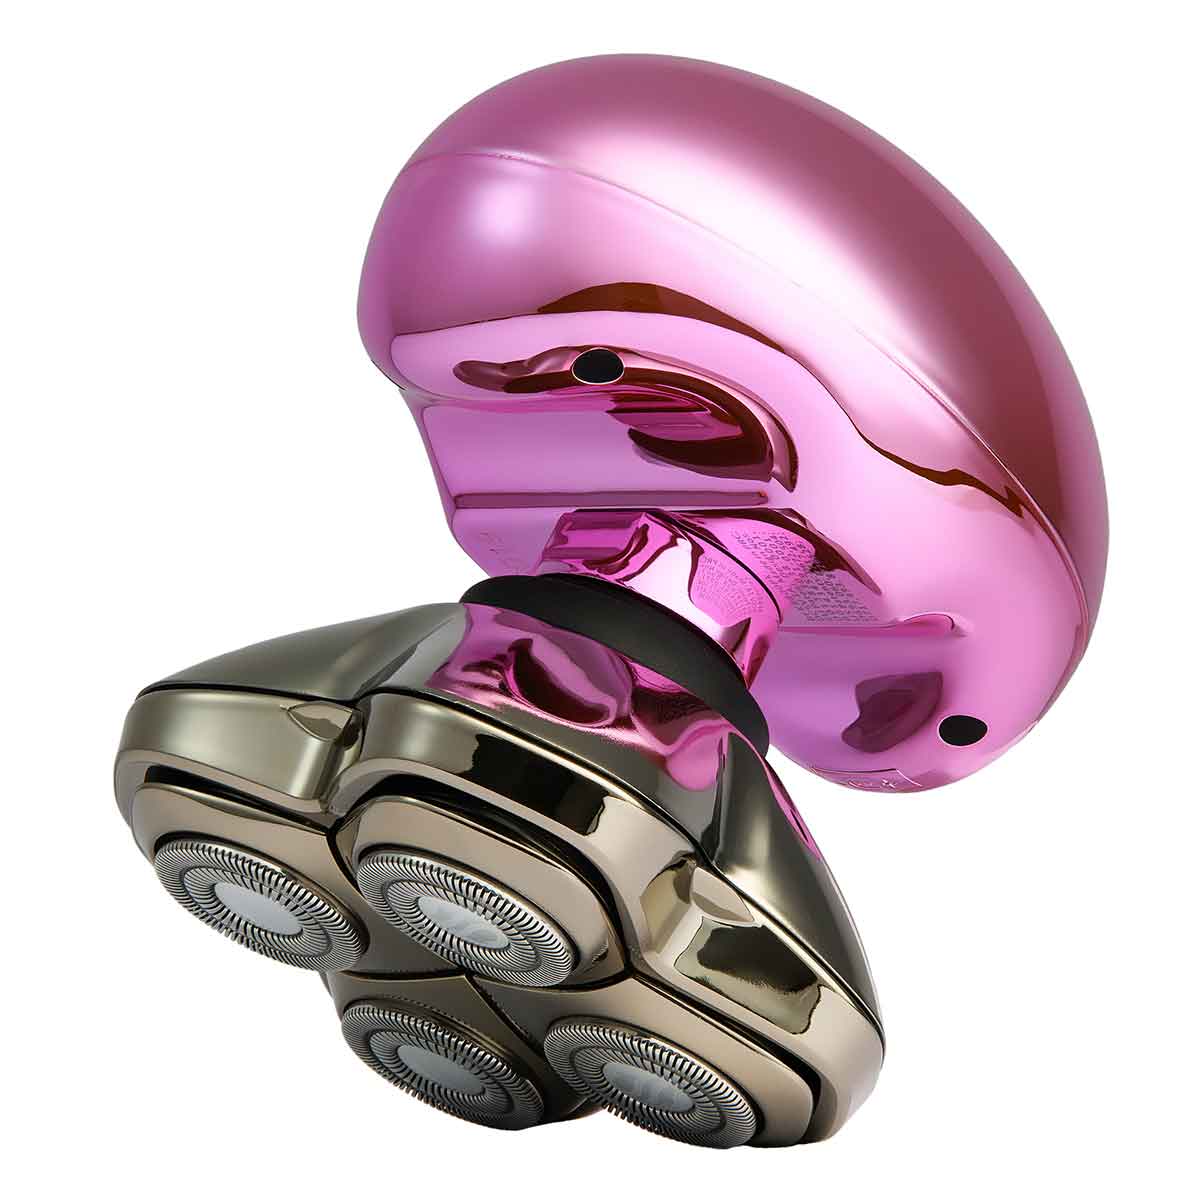 The Butterfly Kiss PRO comes with a four head Carver PRO blade that is removeable and replaceable. The Carver PRO blade features four individual shaving heads, each with 2 cutting rings. The shaver heads pivot and flex to allow the shaver to contour to your curves, giving a quick, smooth shave with little effort.